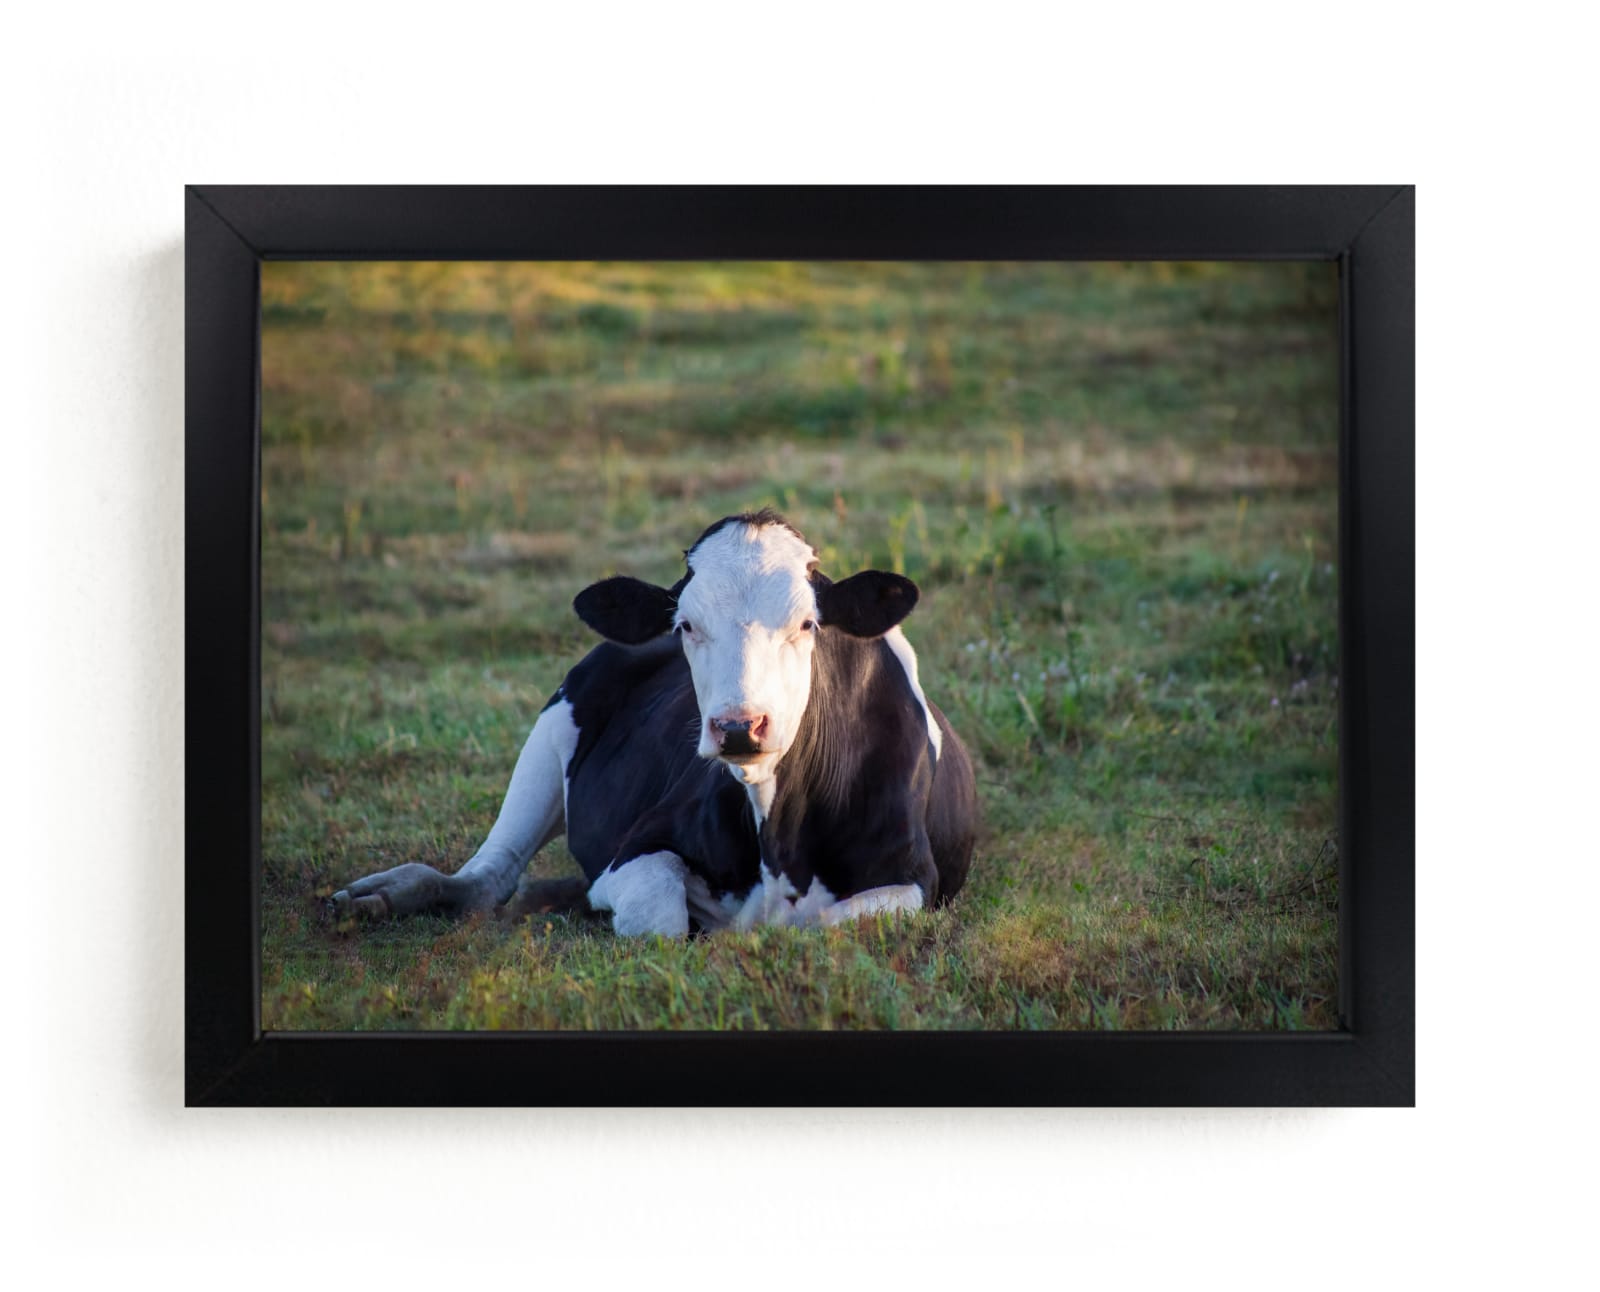 "Cow in the sunset" by Lying on the grass in beautiful frame options and a variety of sizes.